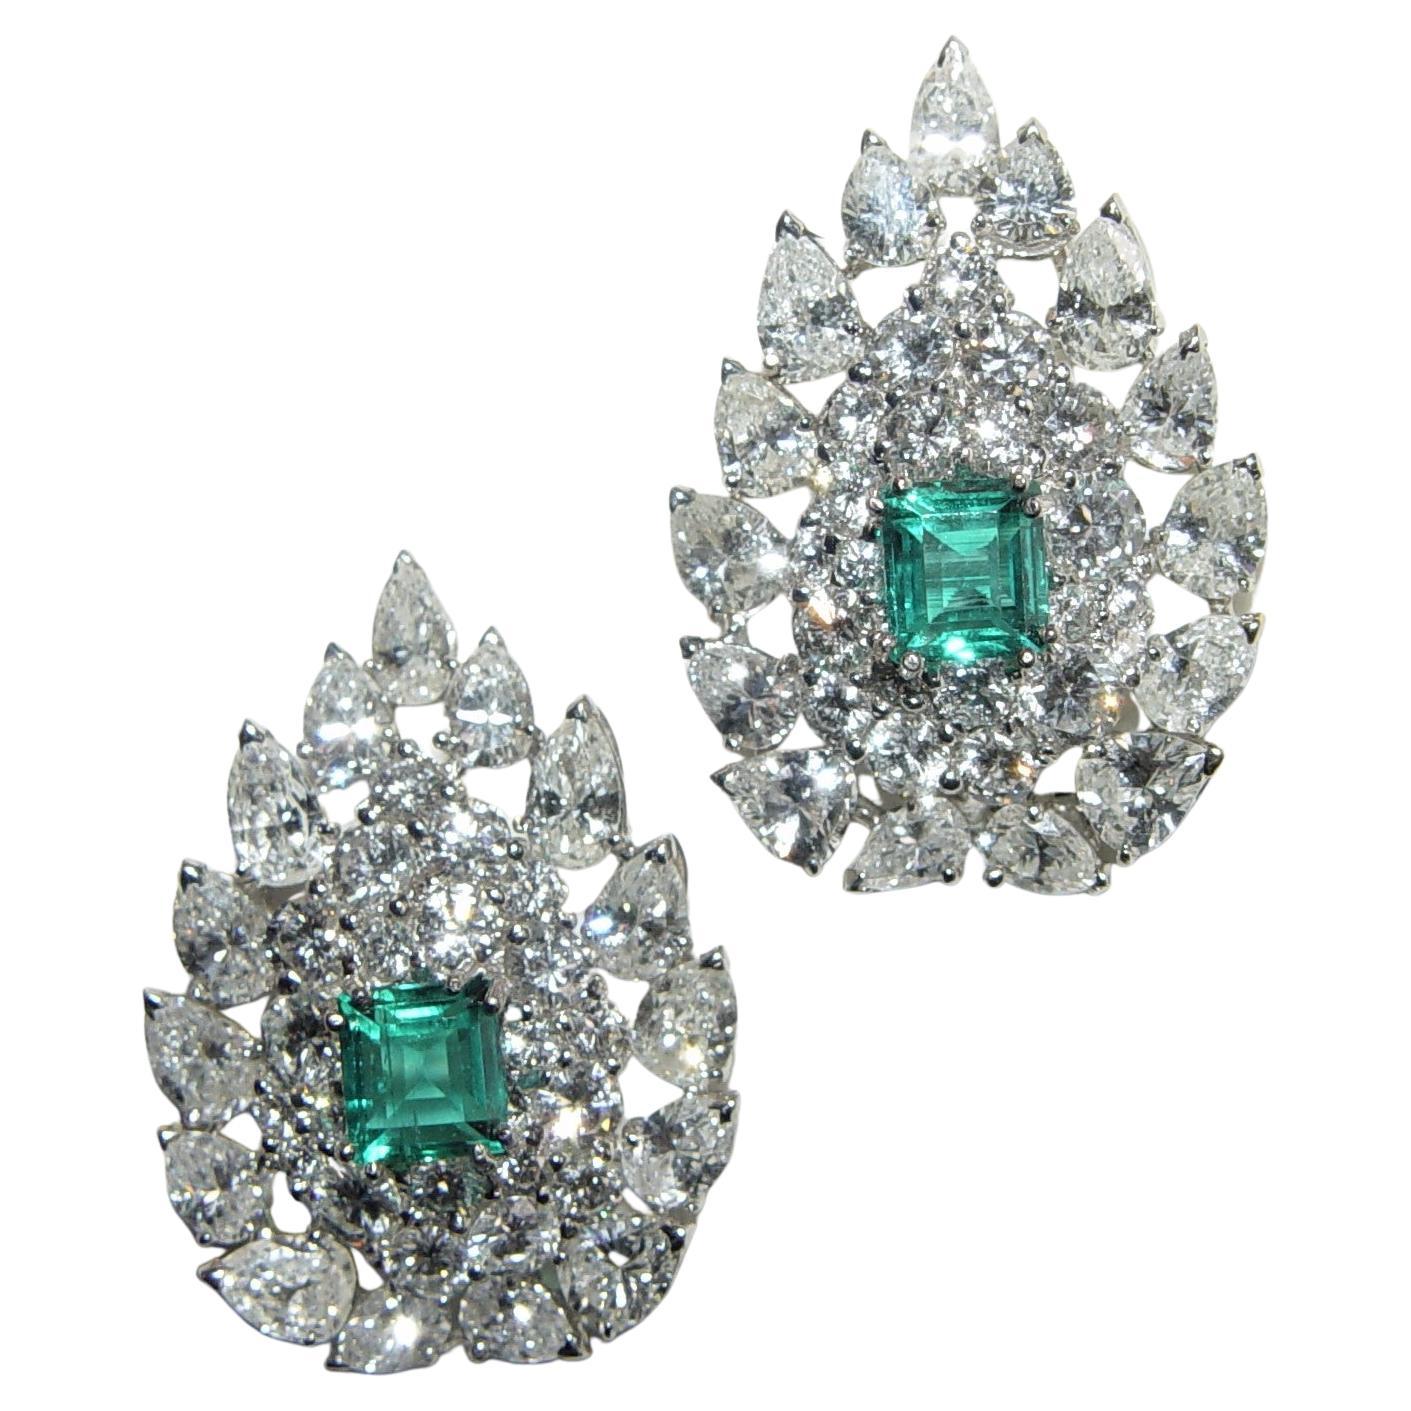 NONE-CLARITY ENHANCED Emeralds are rare! Please check American Gemological Laboratories - The Prestige Gemstone Report # CS 1077839 A and B. According to laboratory gem stone detentions, I have calculated the approximate weight of the Emeralds - it